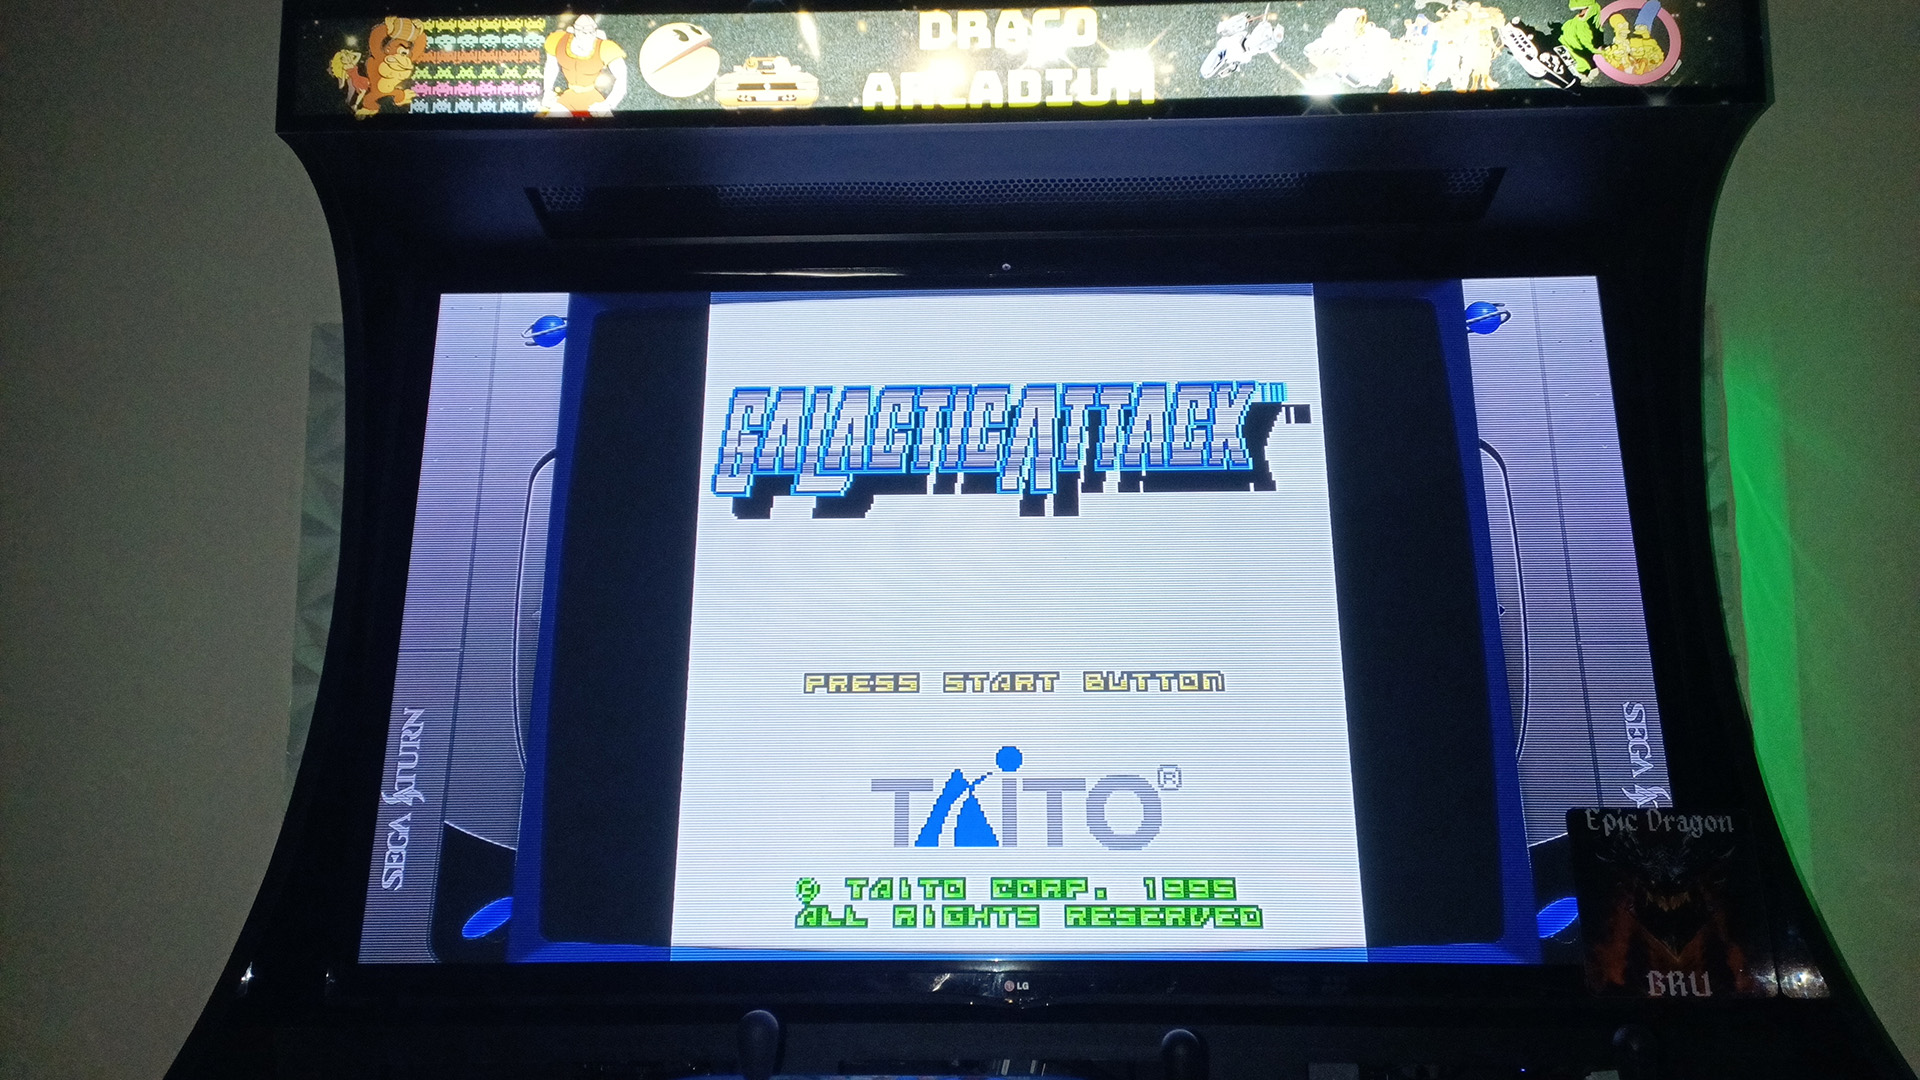 EpicDragon: Galactic Attack: Very Hard (Sega Saturn Emulated) 230,100 points on 2022-08-14 14:54:10